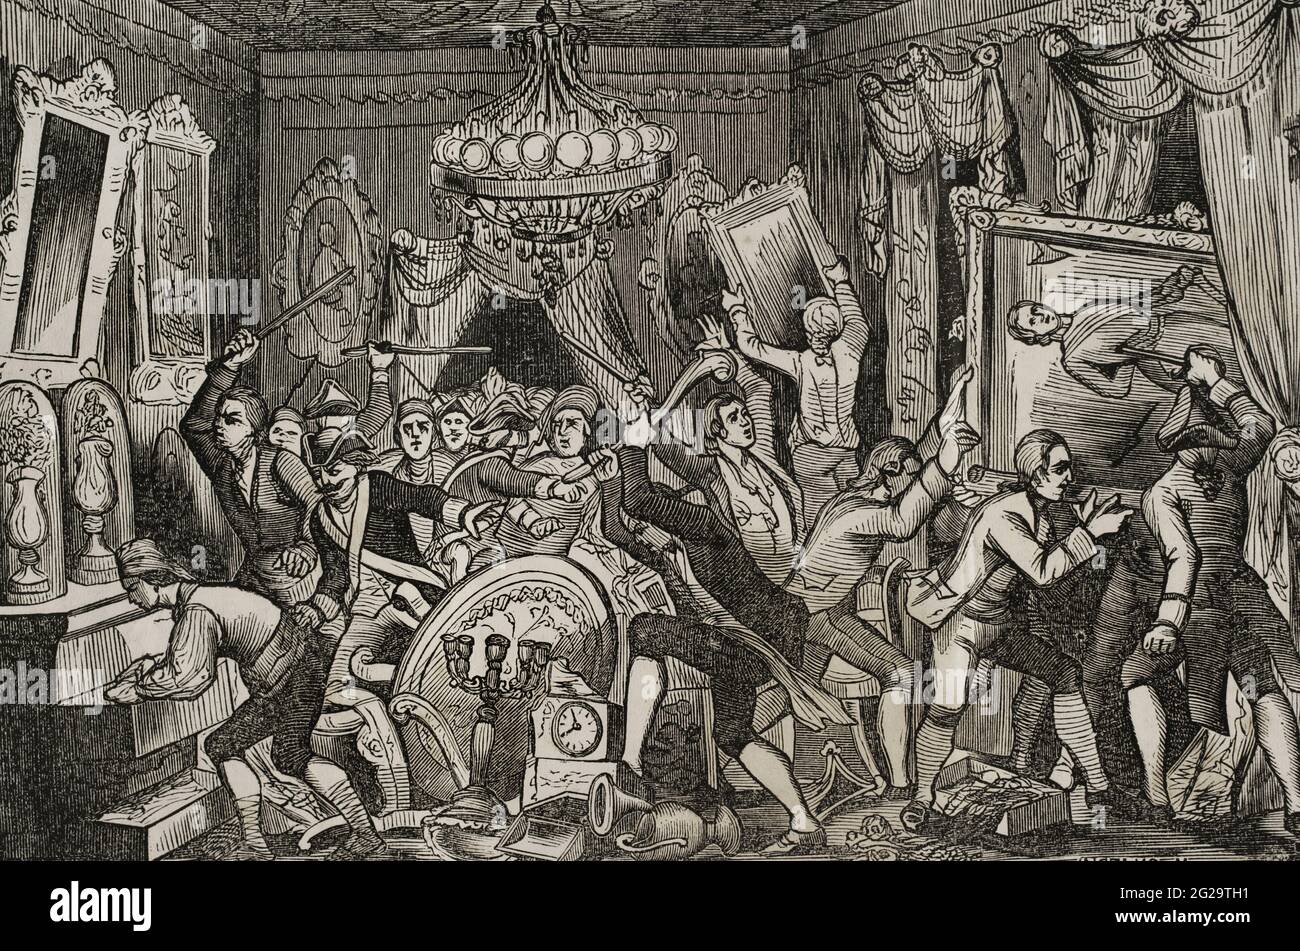 History of Spain. Mutiny of Aranjuez (17-19 March 1808). A small group led by members of the fernandino party (noble people nearby to the Prince of Asturias) is heaped front to the Royal Palace and assaulted Godoy's House, looting, burning and destroying all kinds of belongings. On the morning of 19 March, groups of people went to Godoy's house in Barquillo Street, in Madrid. They broke the glasses of the house and made a bonfire with the furniture. Break-in of the Prince of Peace's house. Engraving. Historia del Levantamiento, guerra y revolución de España by the Conde de Toreno. Madrid, 1851 Stock Photo